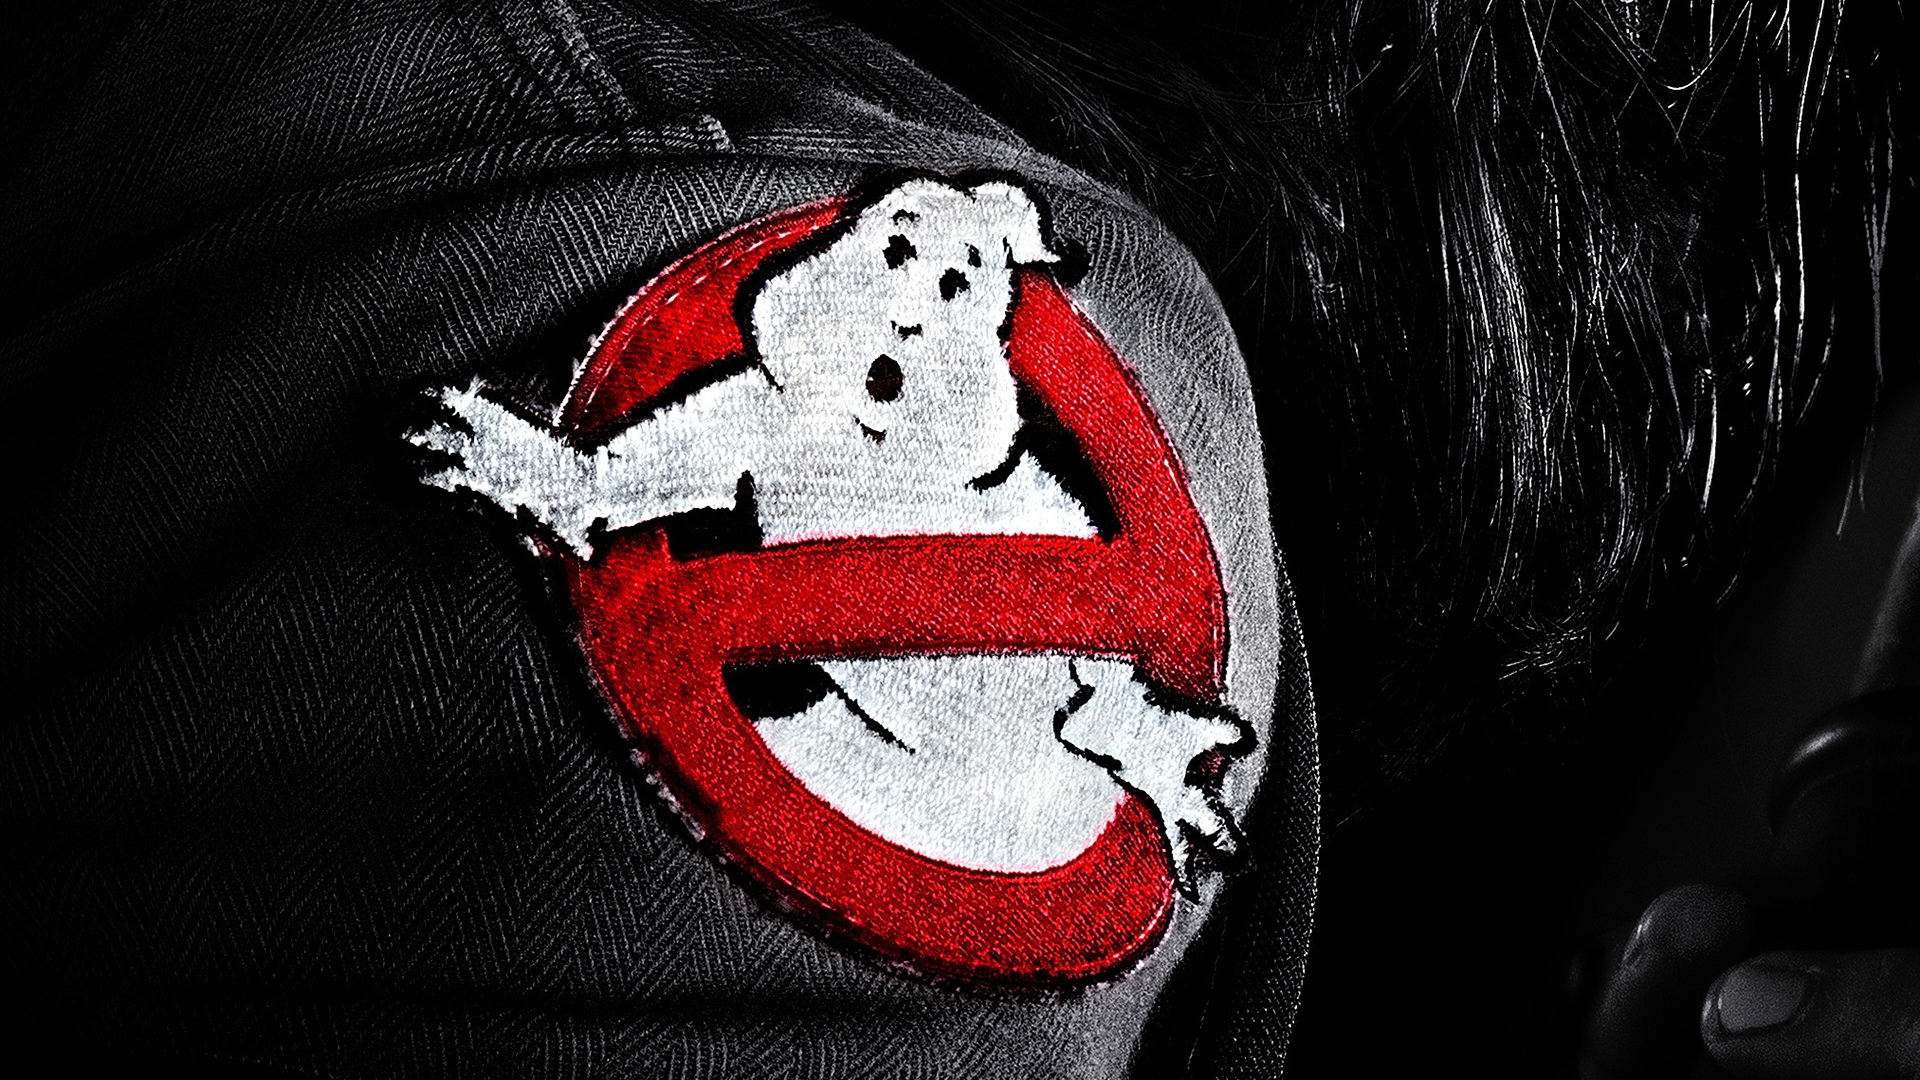 Ghostbusters 2016 movie for 1920 x 1080 HDTV 1080p resolution